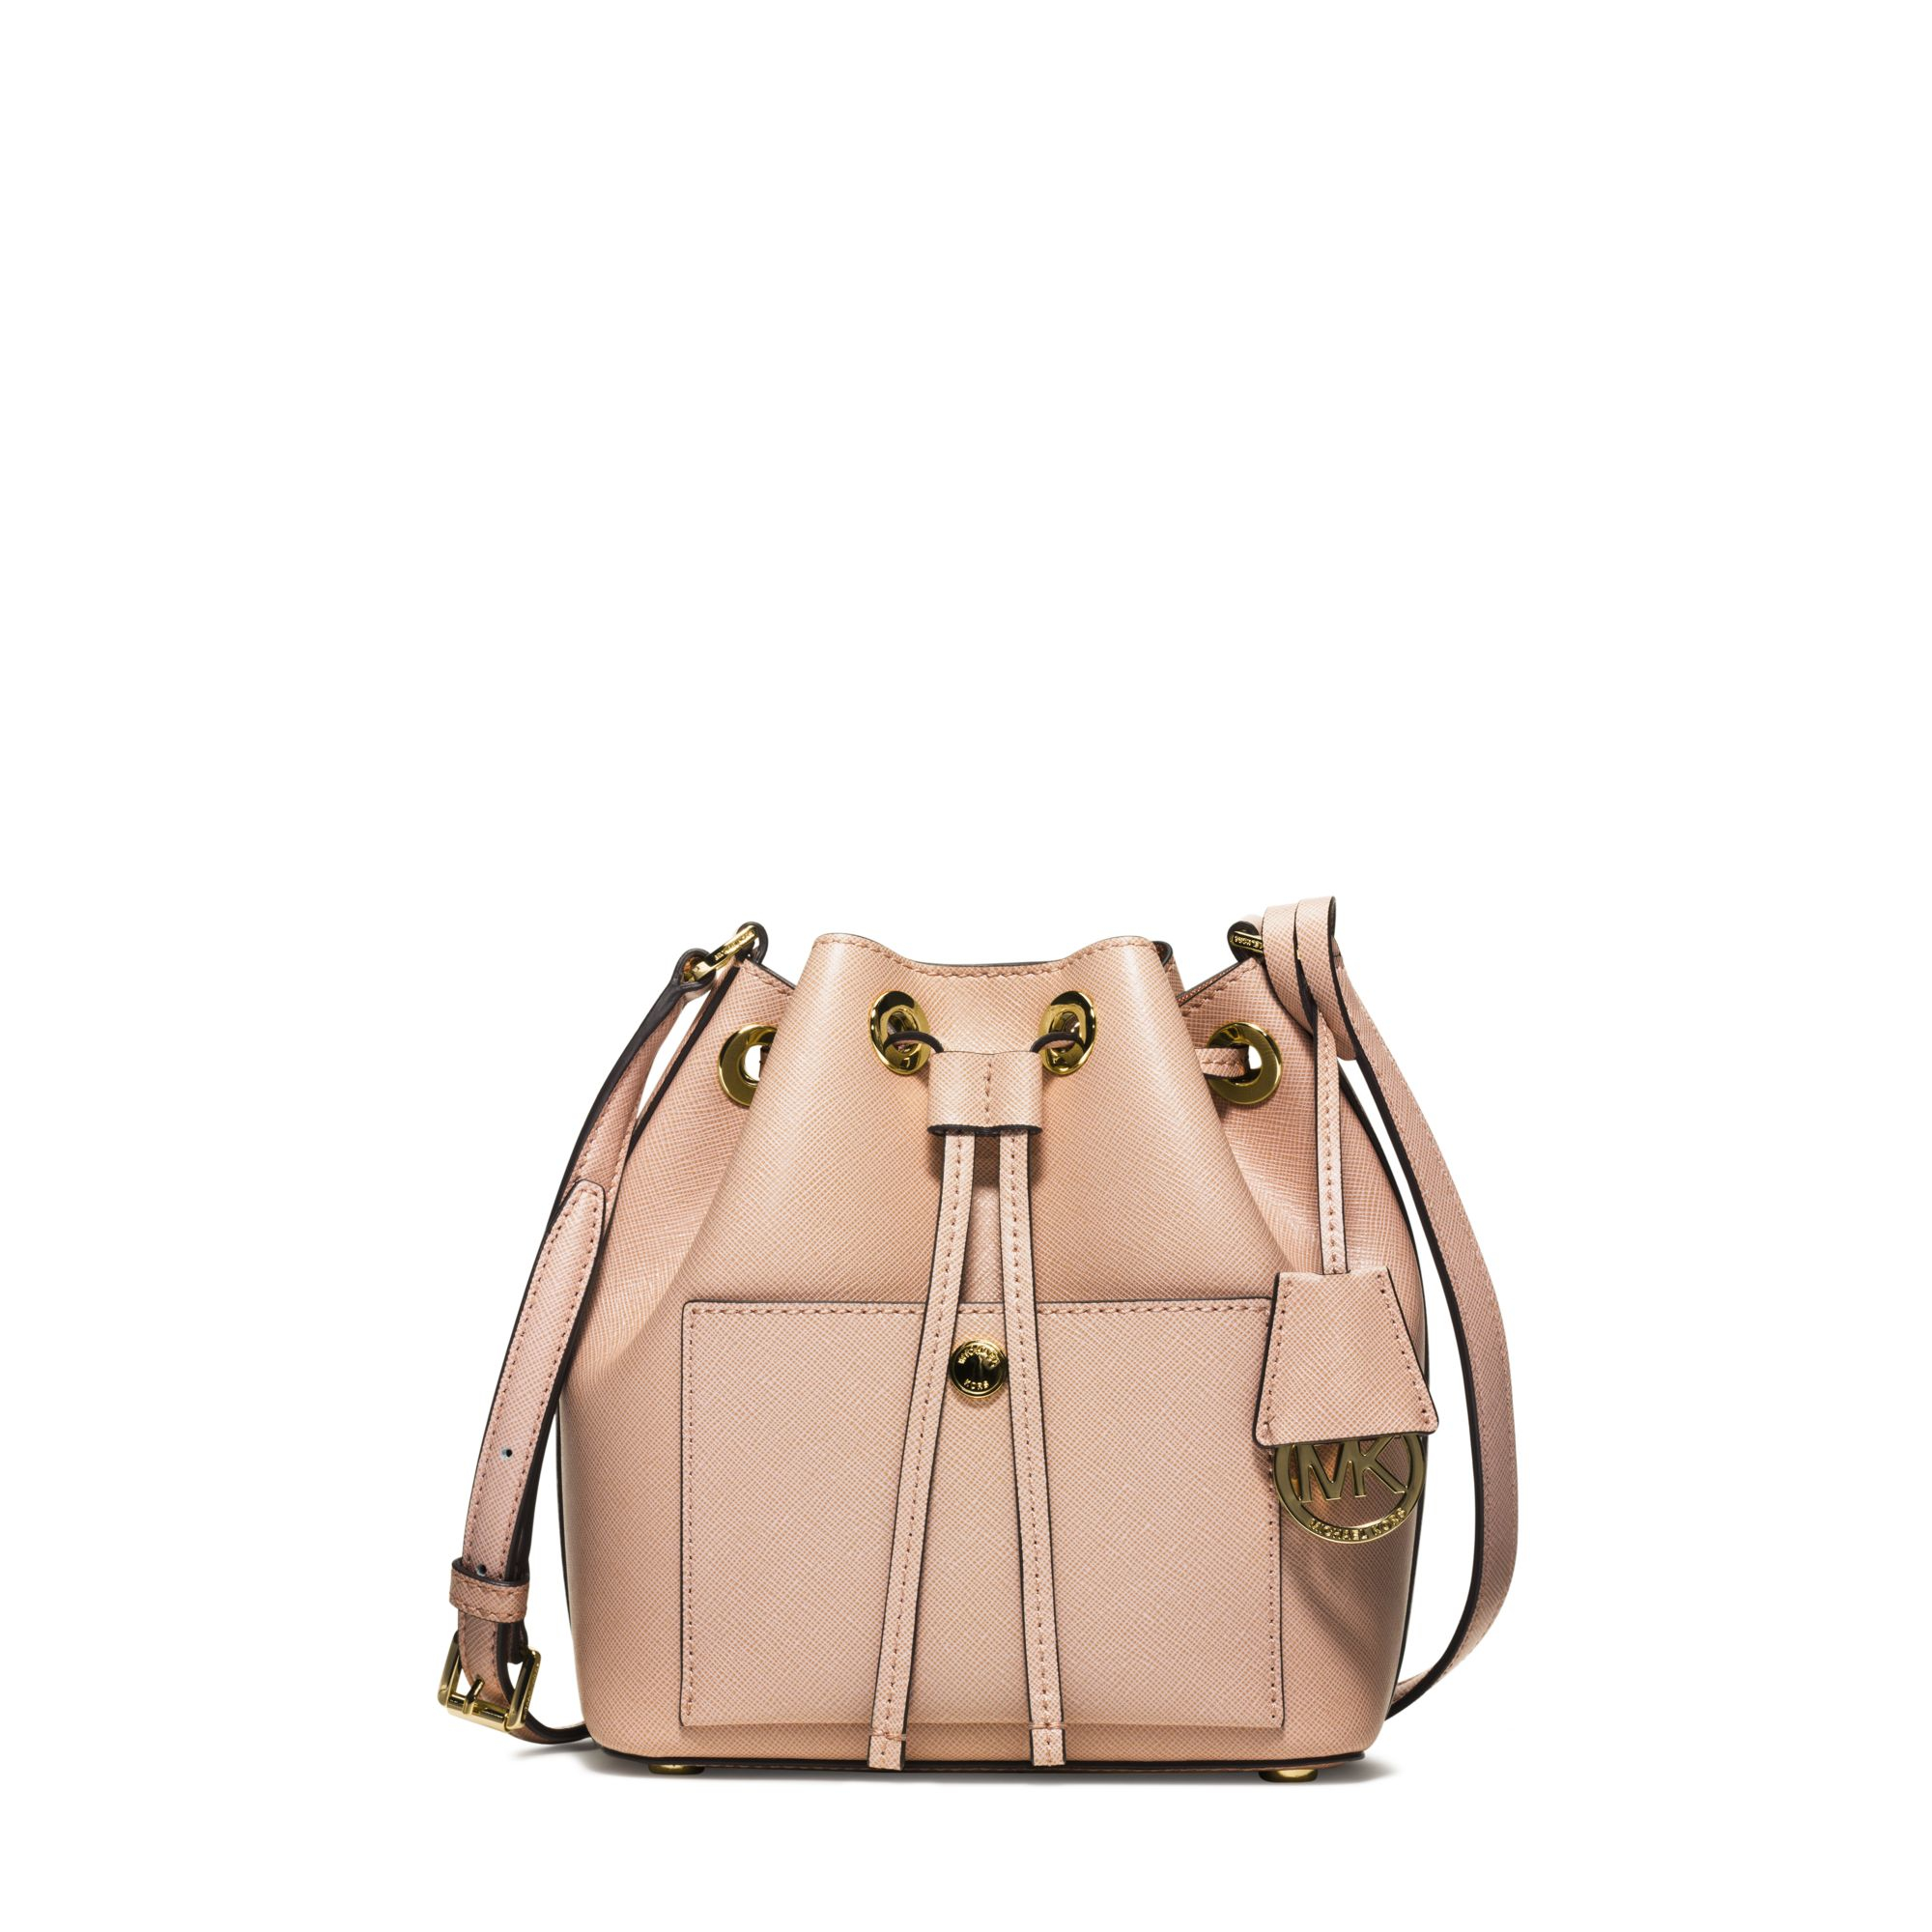 Michael Kors Greenwich Small Saffiano Leather Bucket Bag in Pink ...